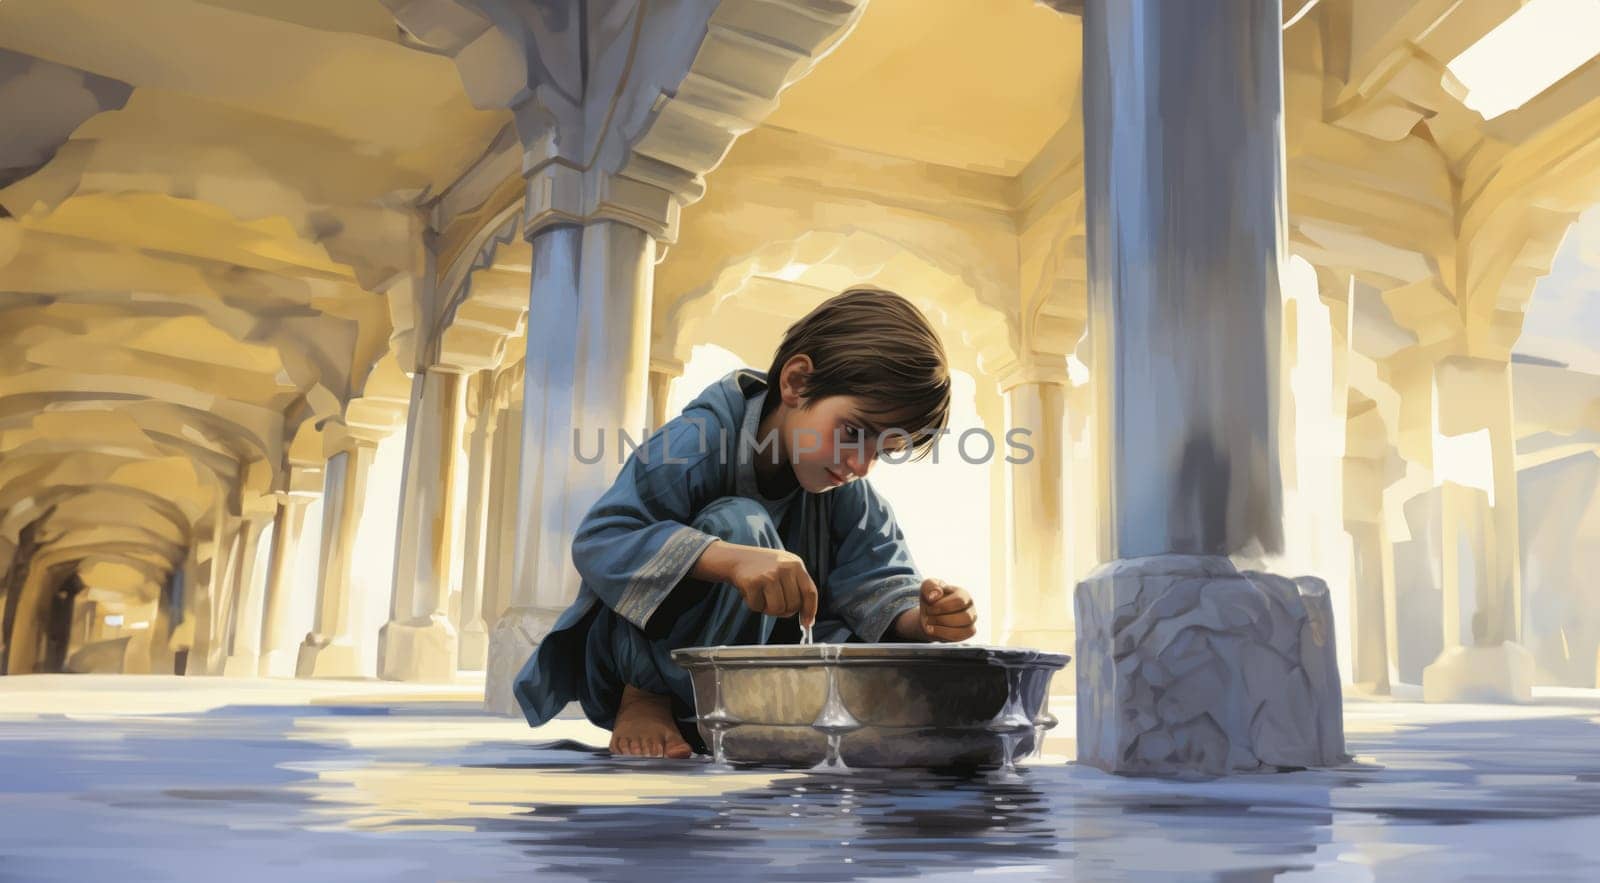 A young boy engages in the Islamic ritual of "abdest," cleansing and purifying his body before prayer, embodying the spiritual traditions and cultural practices associated with Islamic worship.Generated image. by dotshock